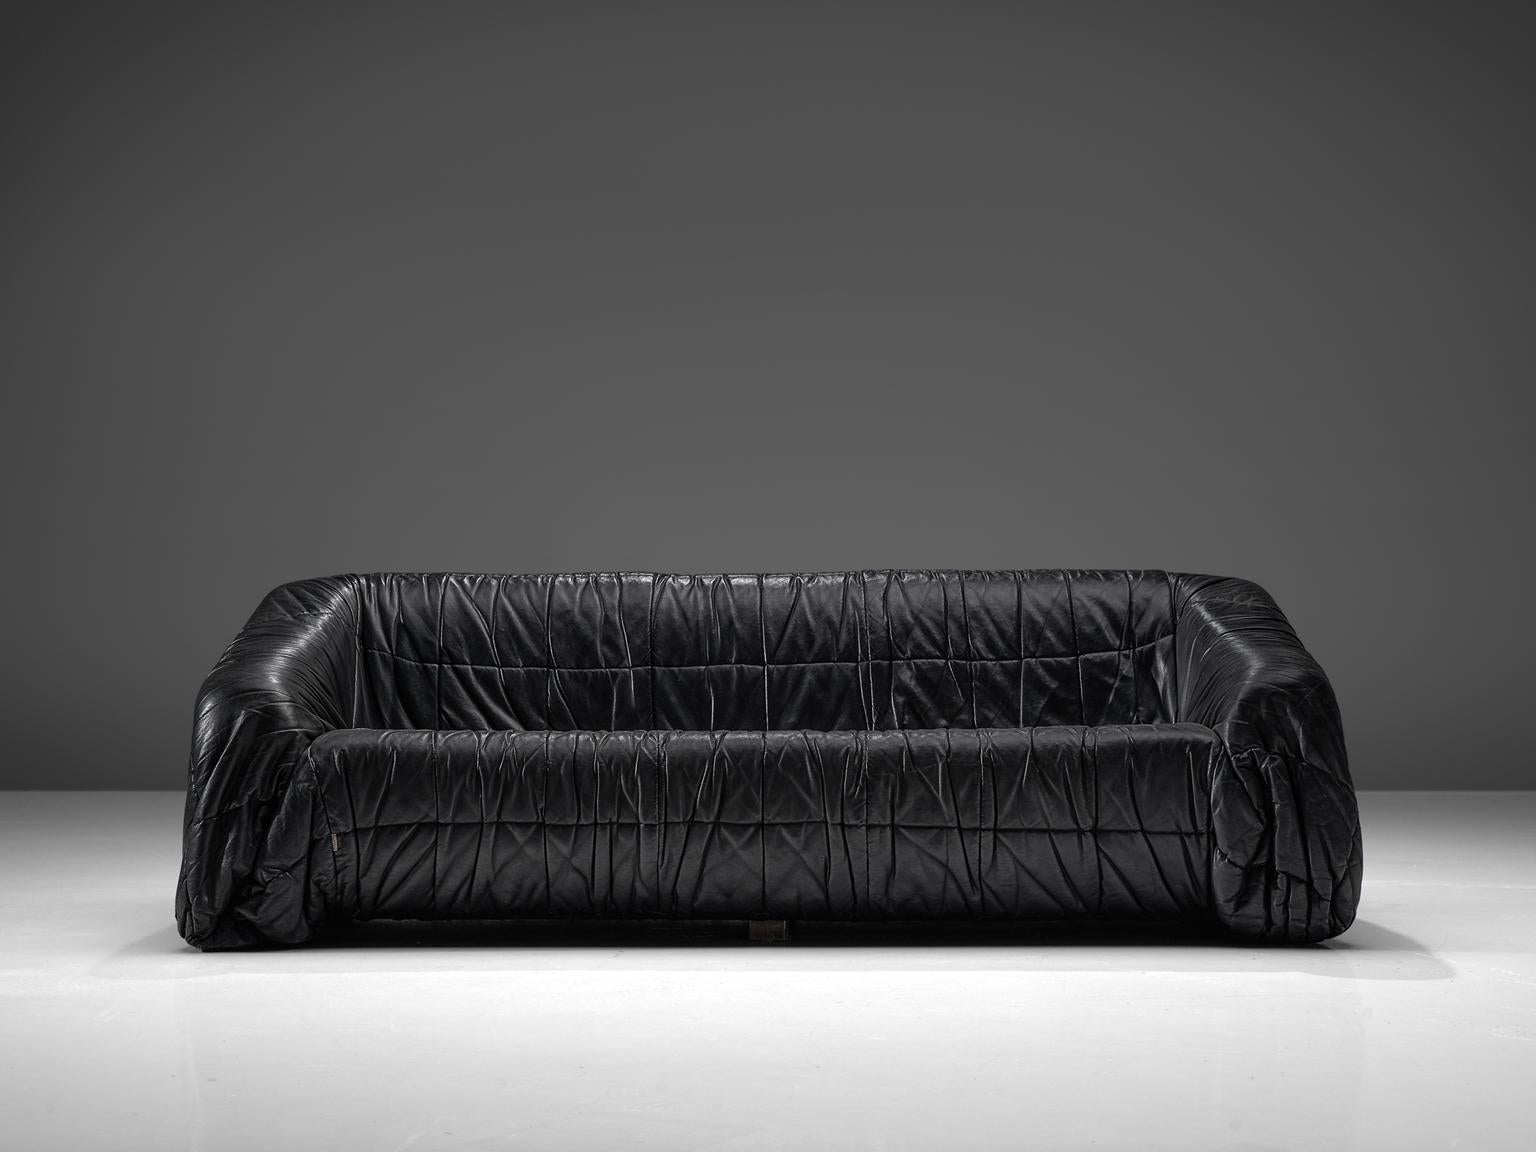 Gionathan de Pas, Donato D'urbino & Paolo Lomazzi for Dell'Oca 'Piumino' sofa, black leatherette, Italy, 1970. 

This sofa is completely molded out of foam and covered with folded black, thick butter-soft leatherette. One of the mean traits of this